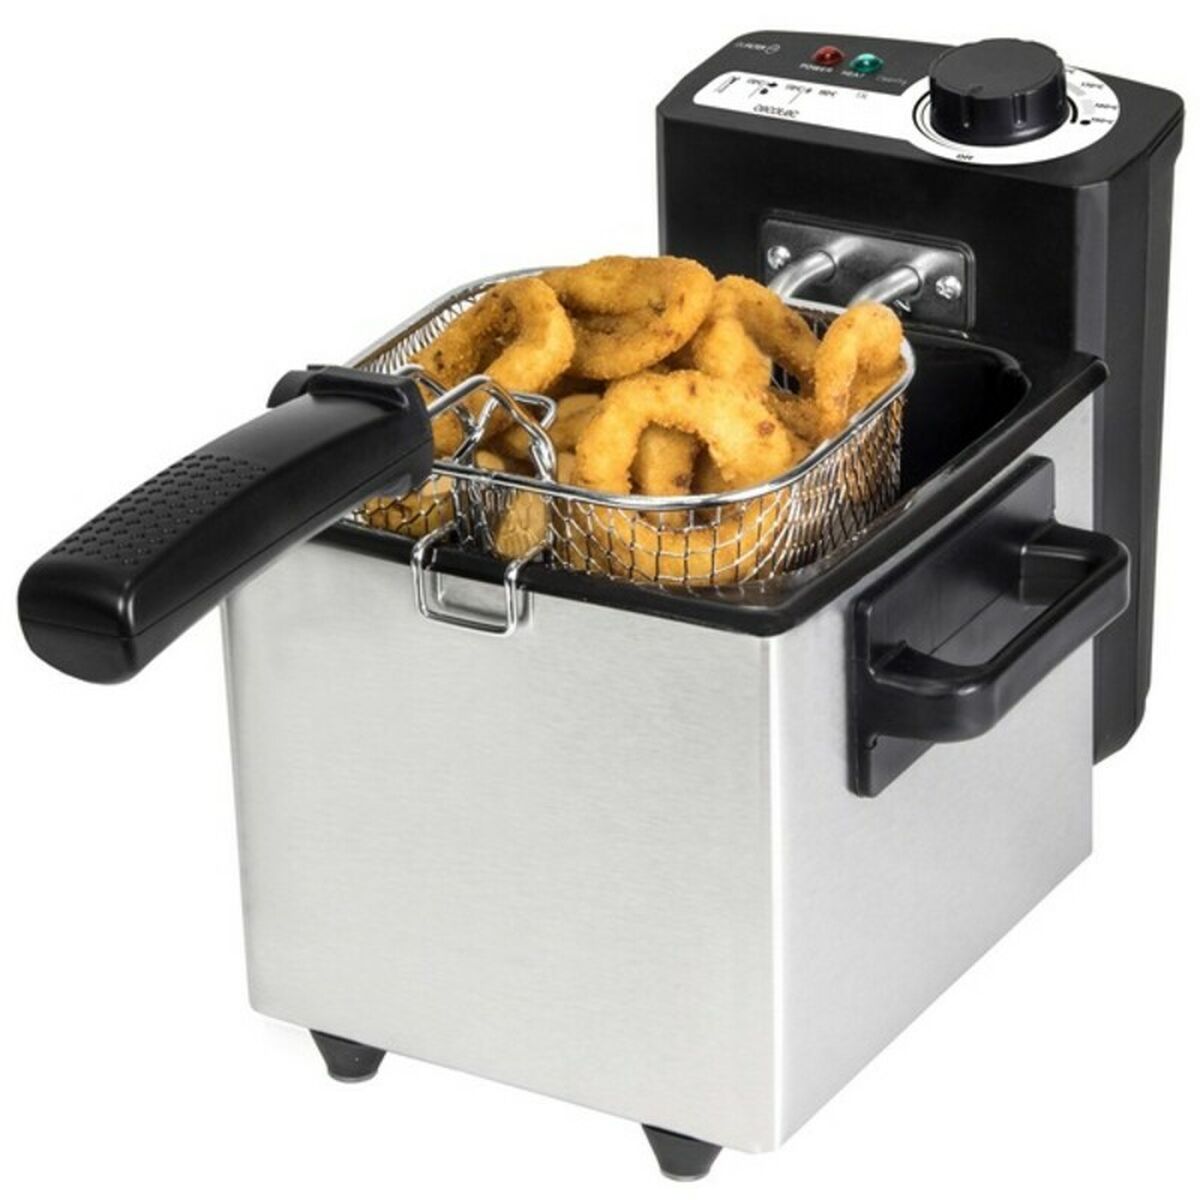 Fritteuse Cecotec Cleanfry 1,5 L 1000W Rostfreier stahl - CA International 